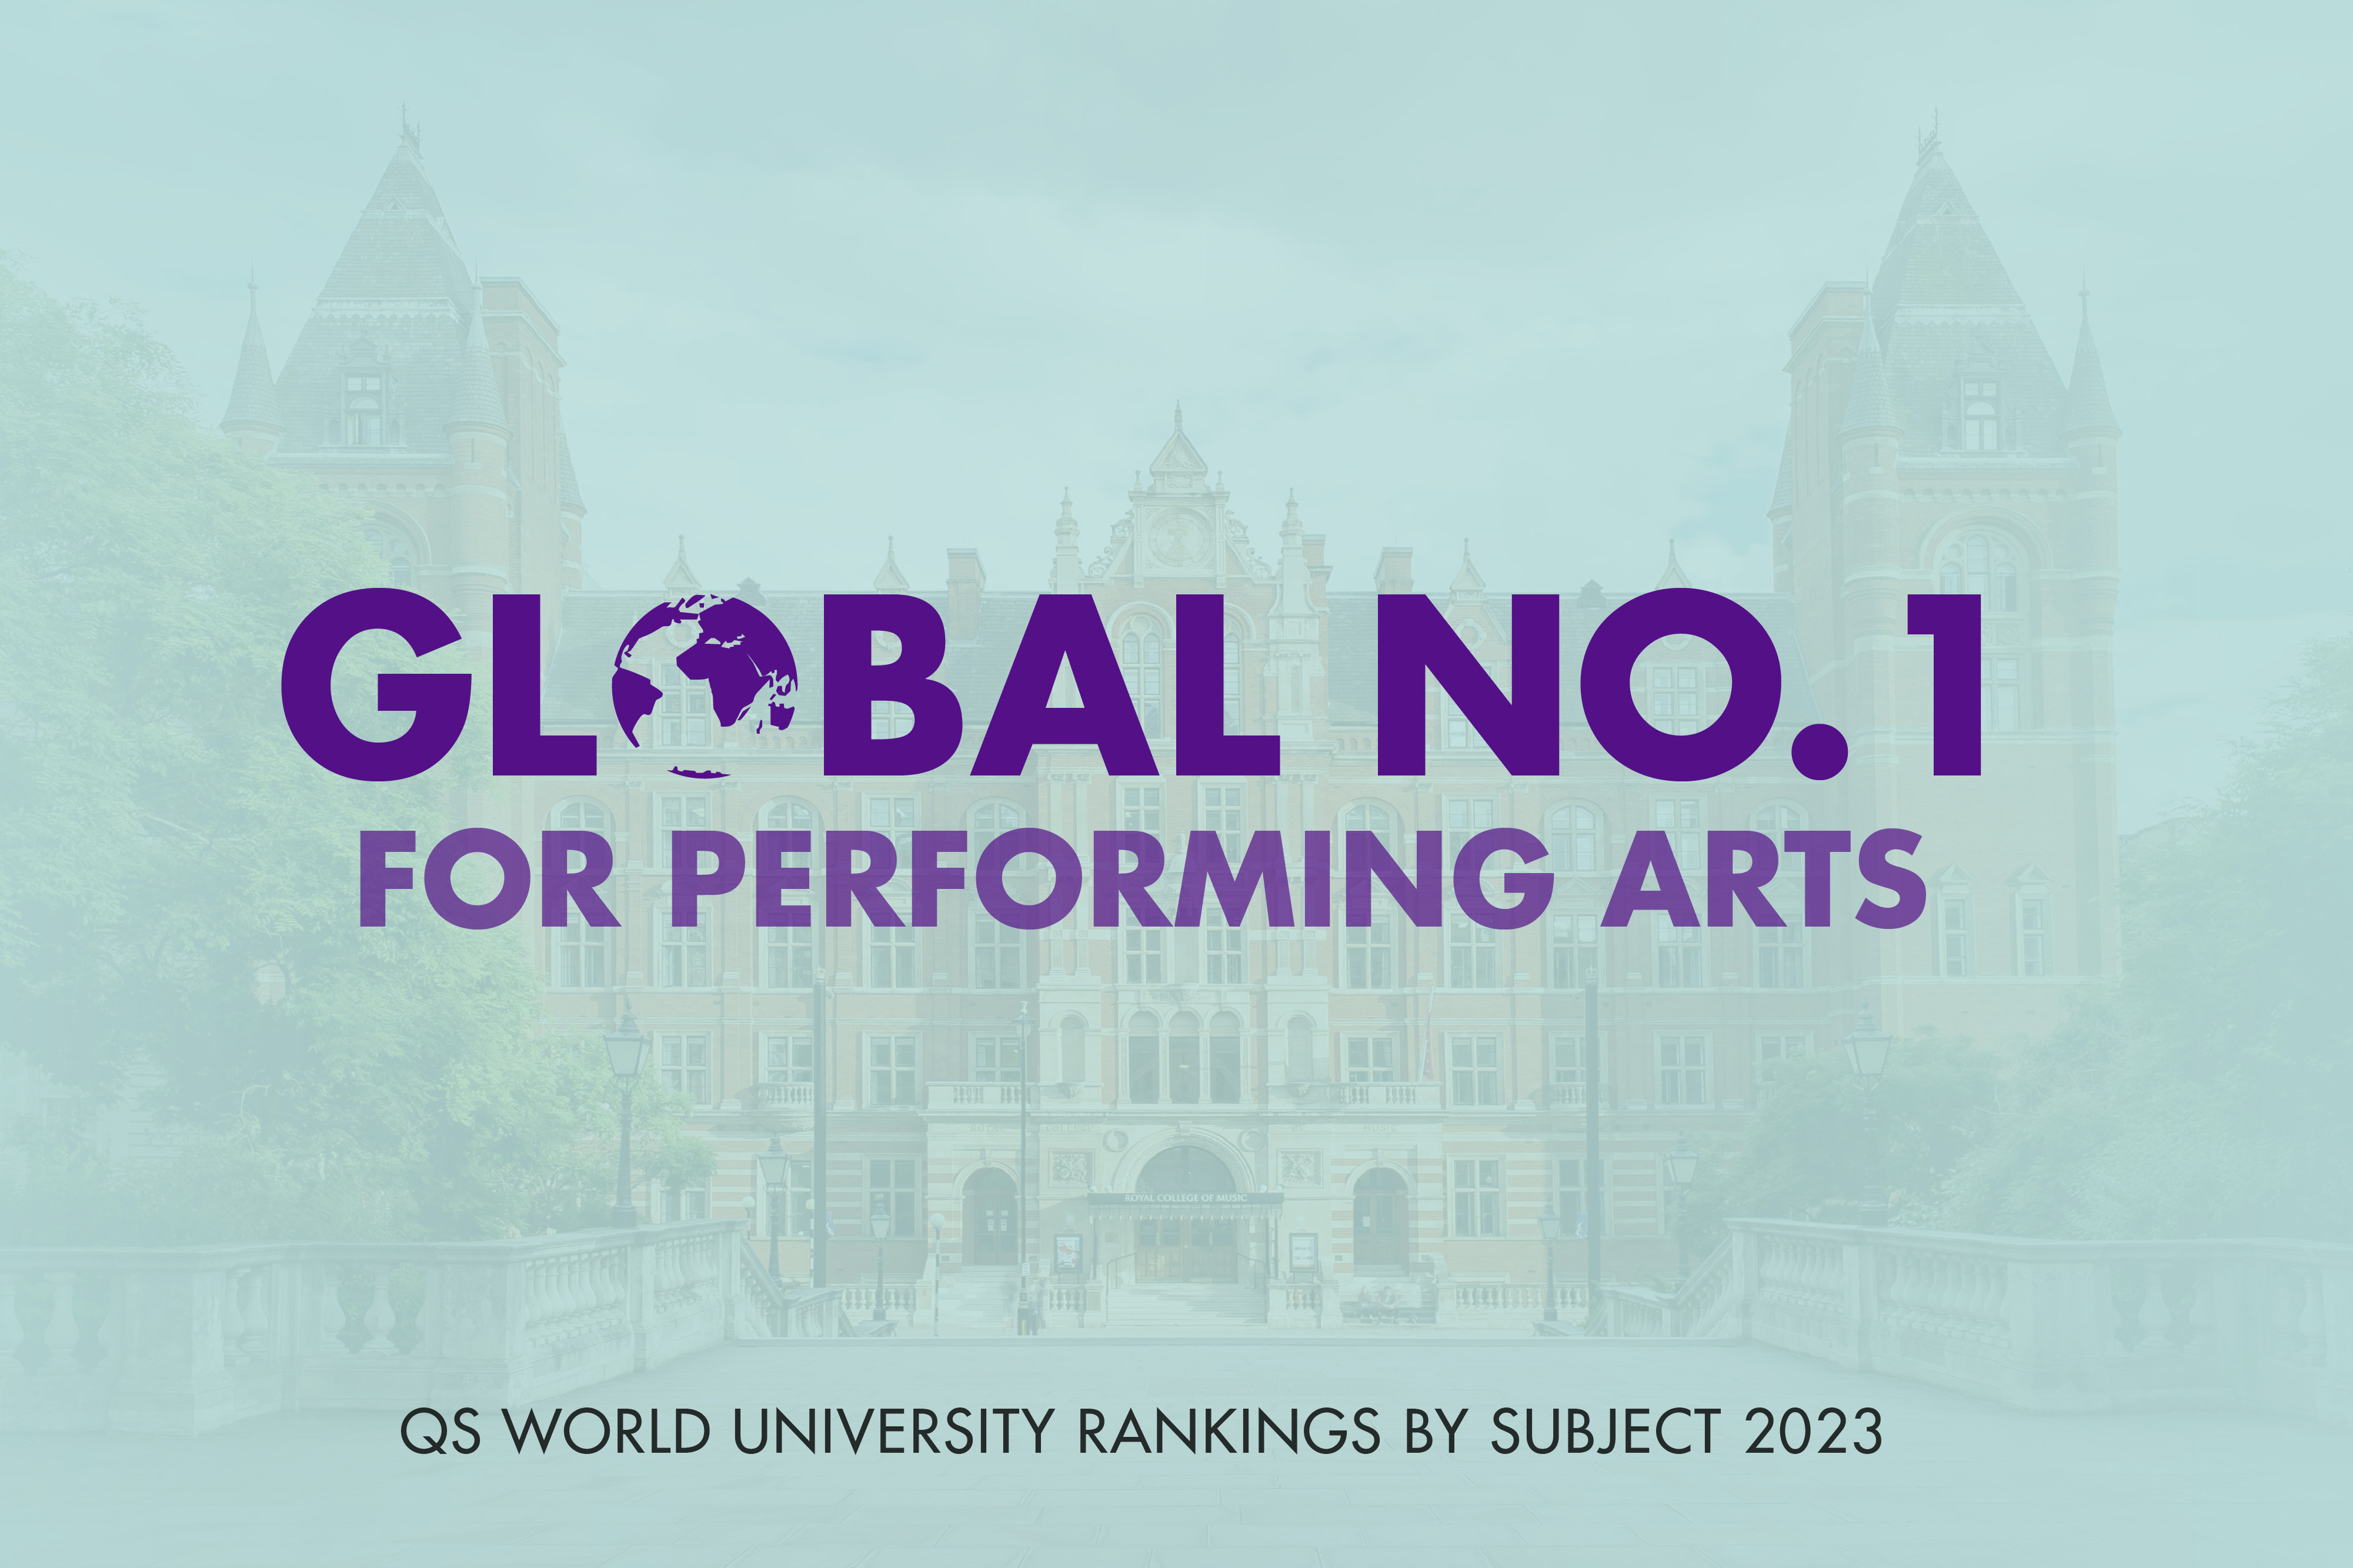 image for news story: 鶹Ƶ ranked global No. 1 for performing arts 2023